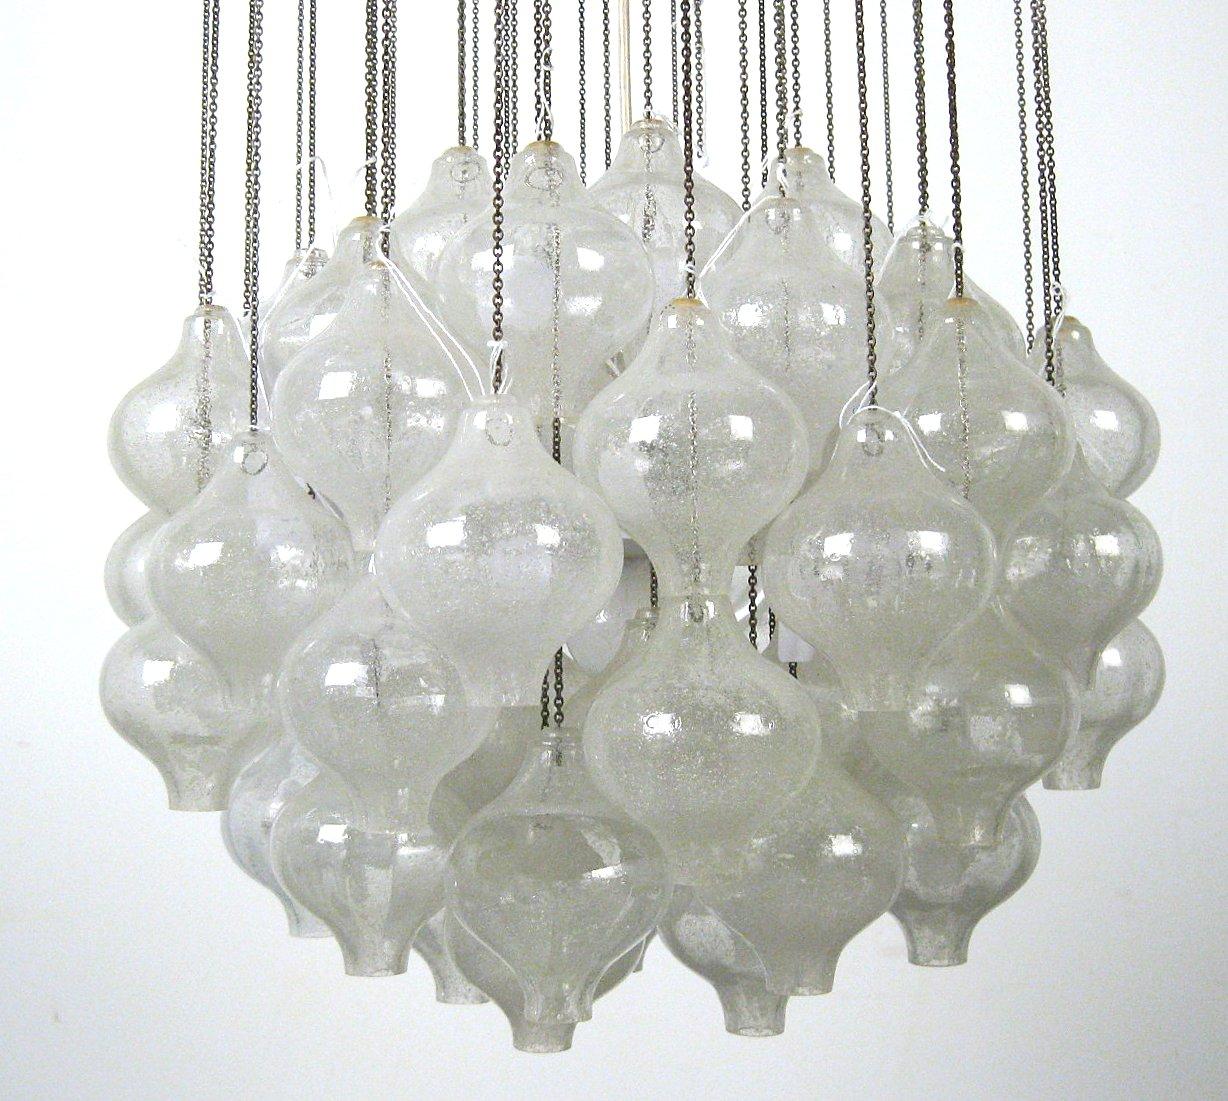 Large Kalmar chandelier that consist of numerous blown glass elements which are highly saturated with tiny air bubbles that gives the glass a white look, each element is resting on a nickel chain hanging from a wood ceiling plate, elements are